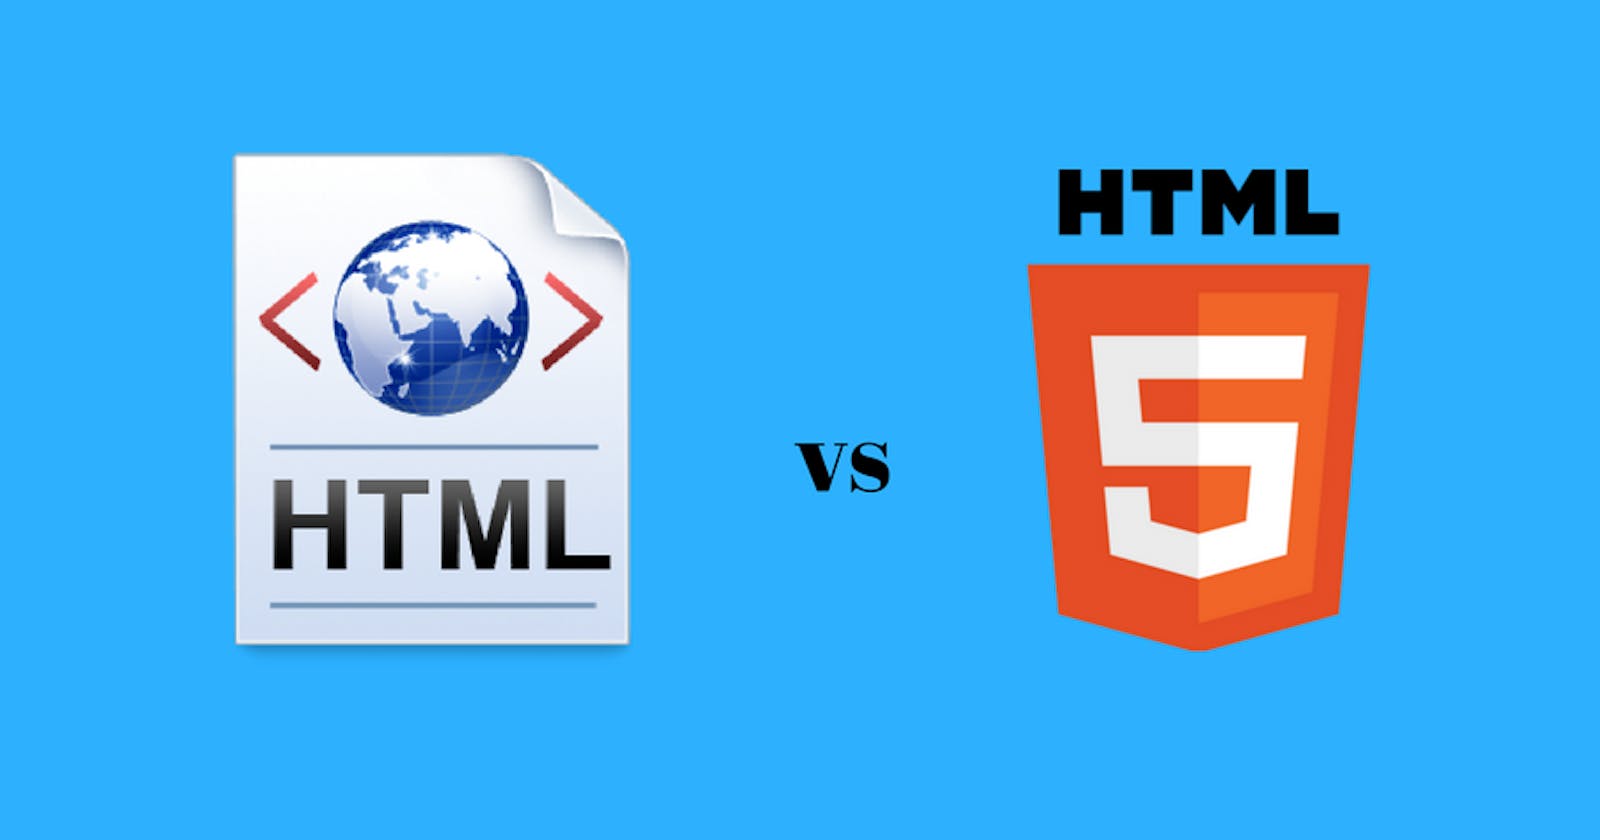 HTML and HTML5: What to know...